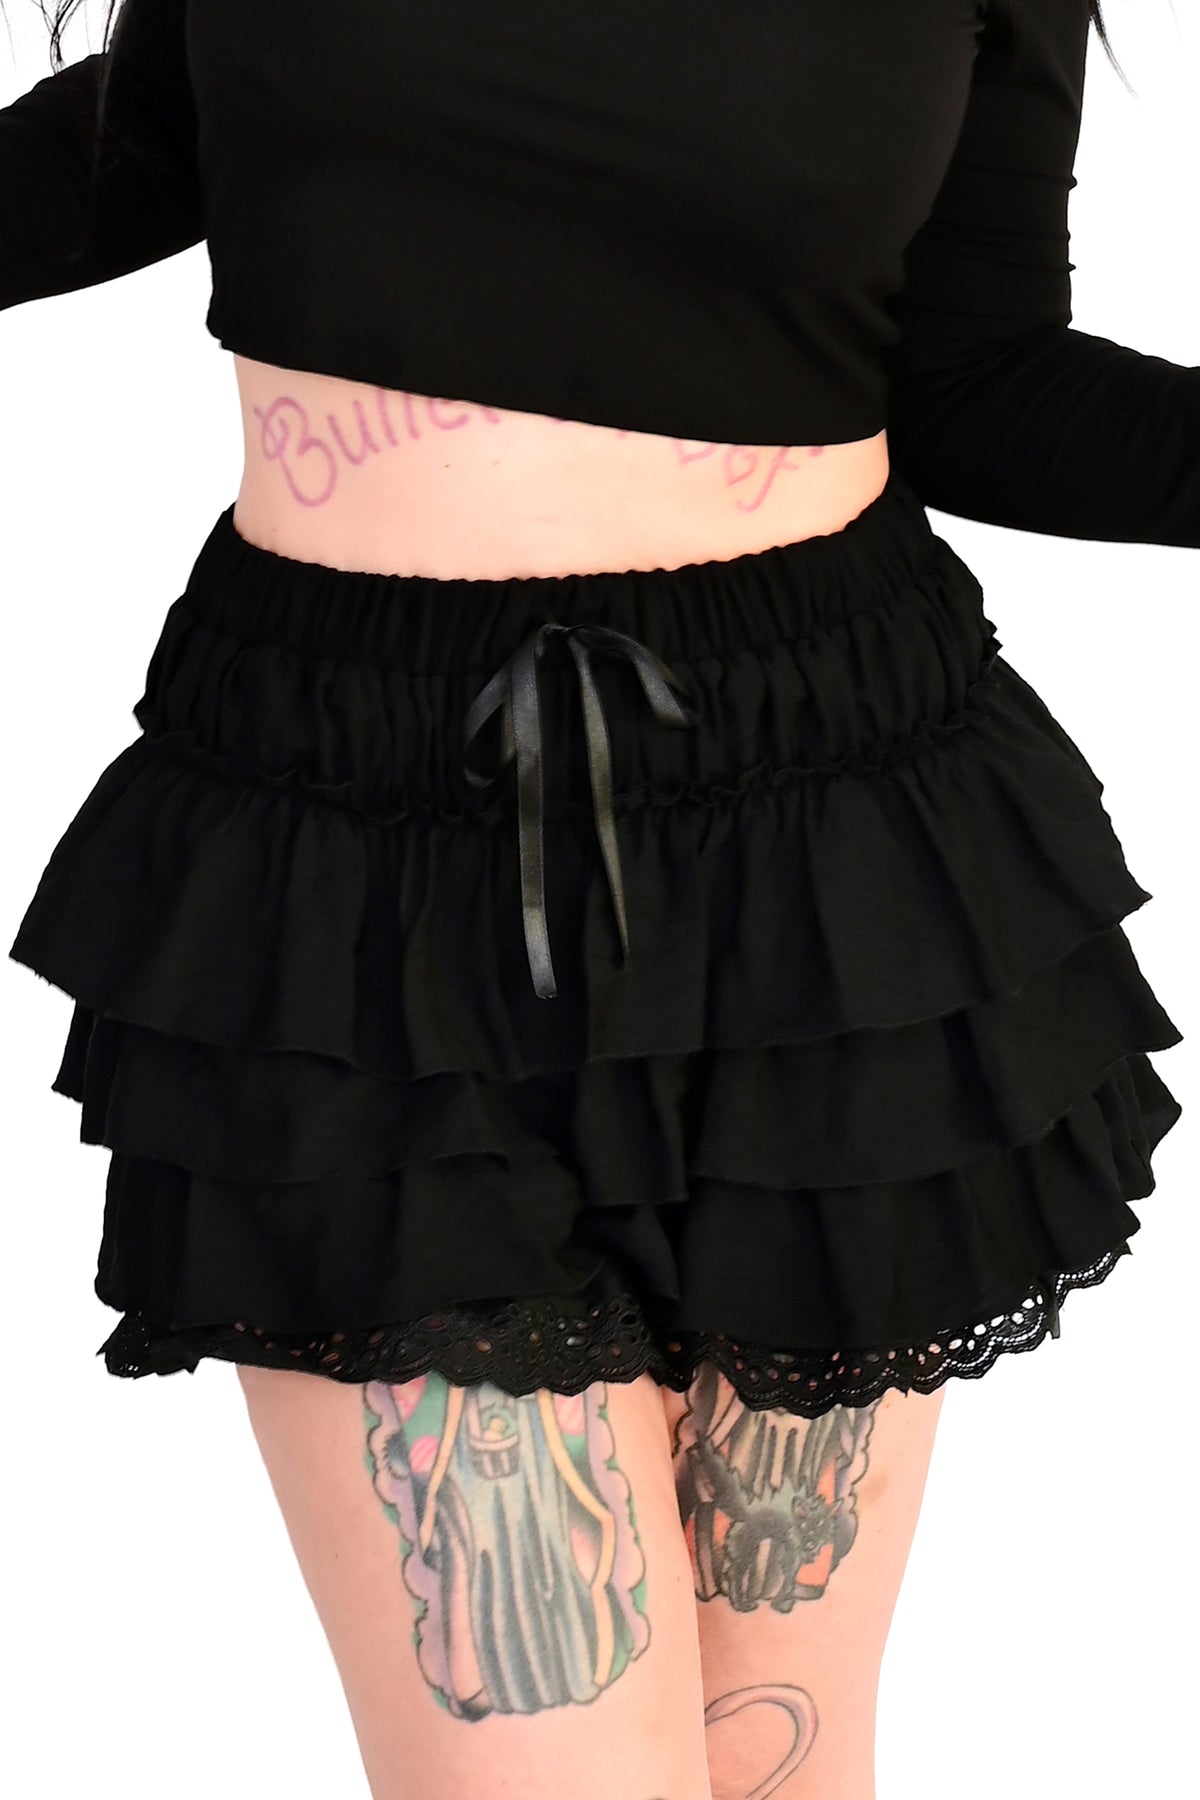 black ruffle bloomers with bow on front and lace bottom hem